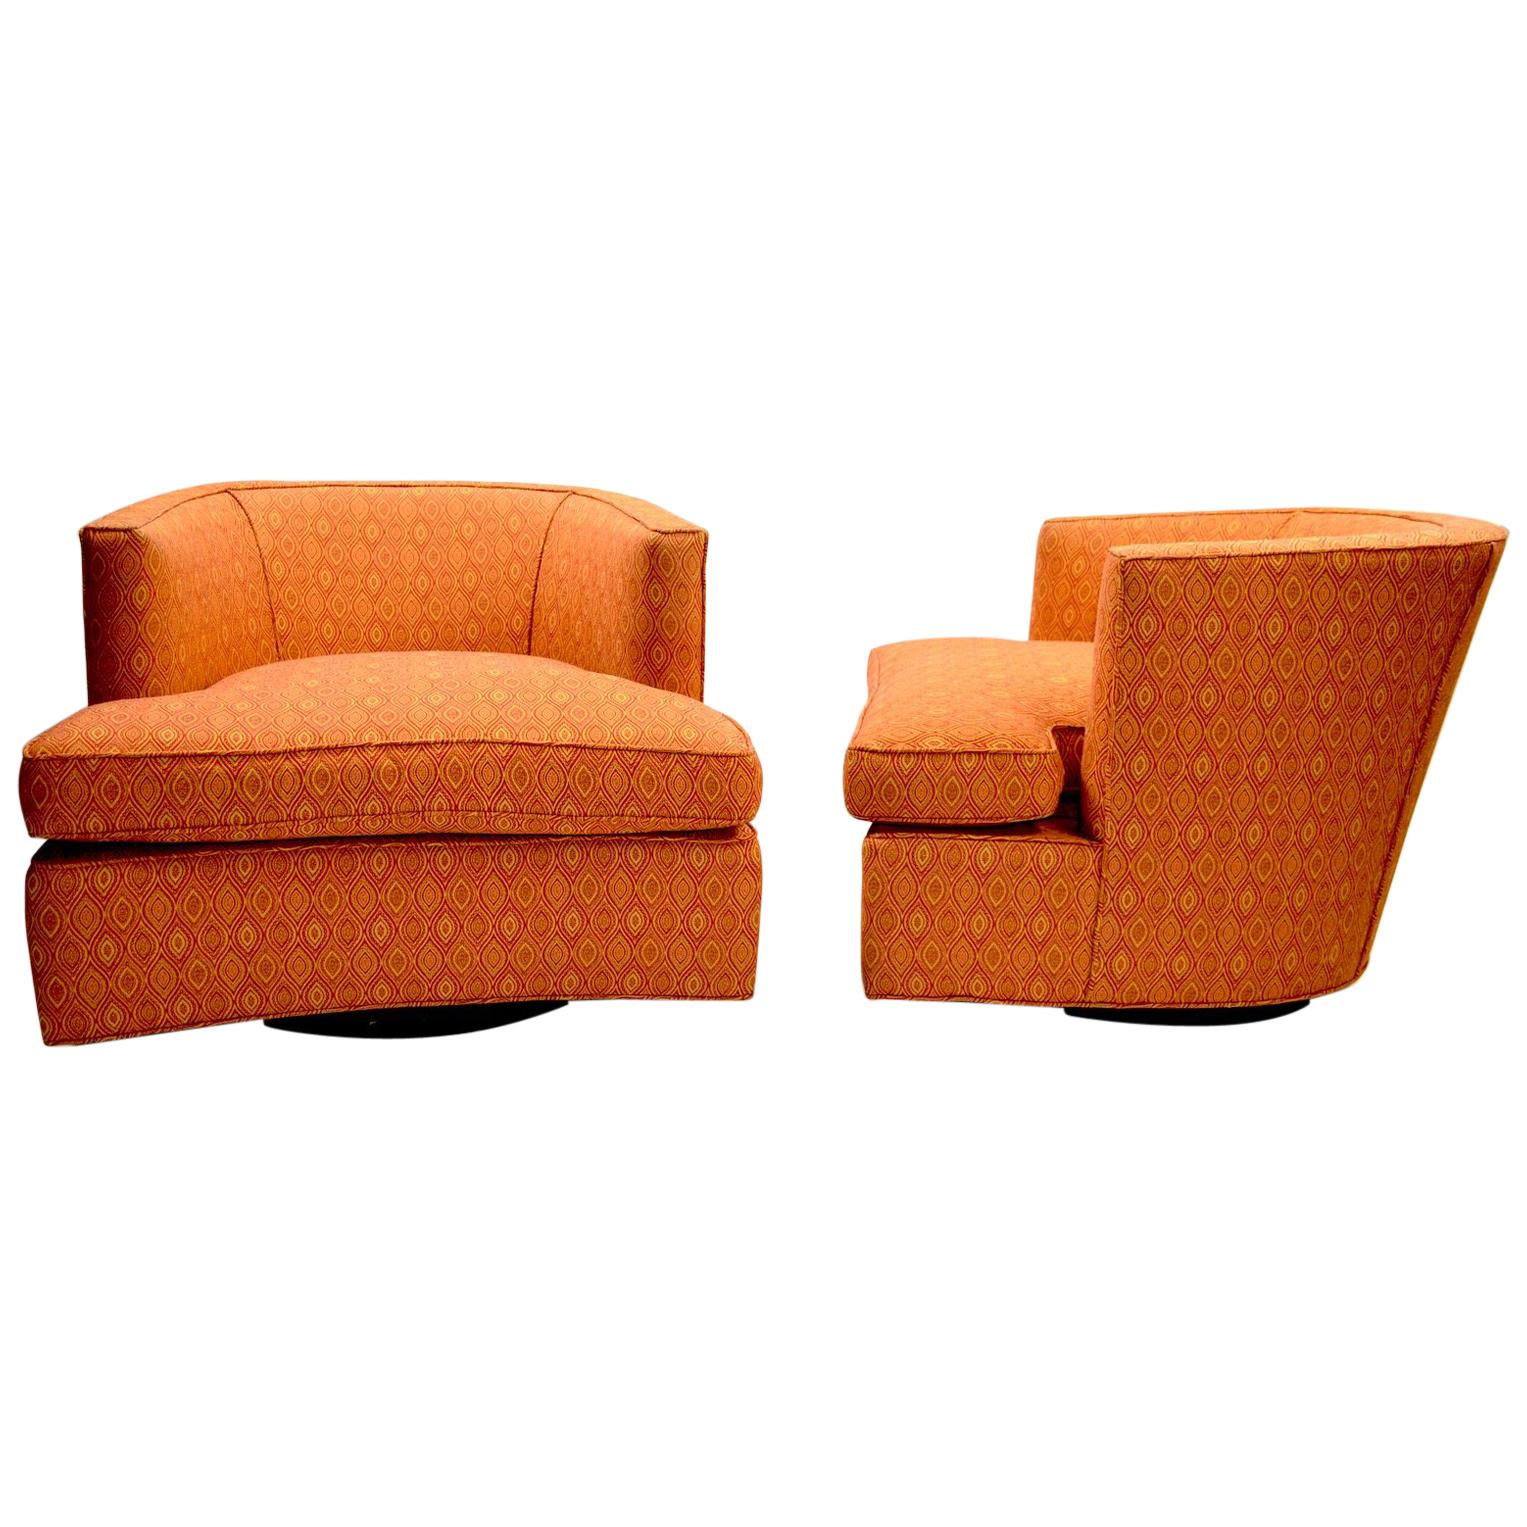 Pair of Swivel Lounge Chairs Designed by Harvey Probber